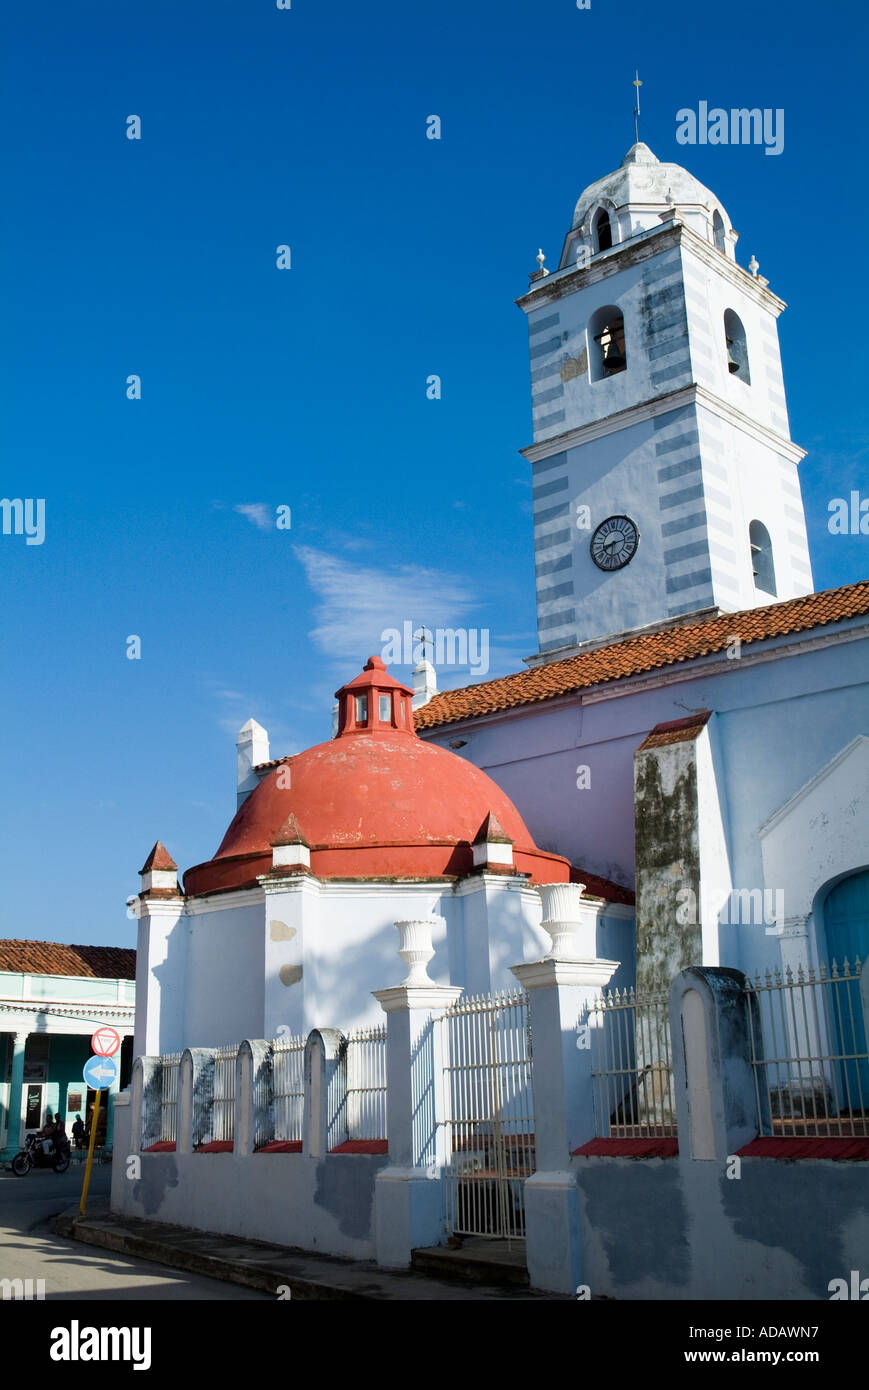 The Parroquial Mayor, a church whose early 16th-century origins make it the country's oldest, Sancti Spiritus, Cuba. Stock Photo